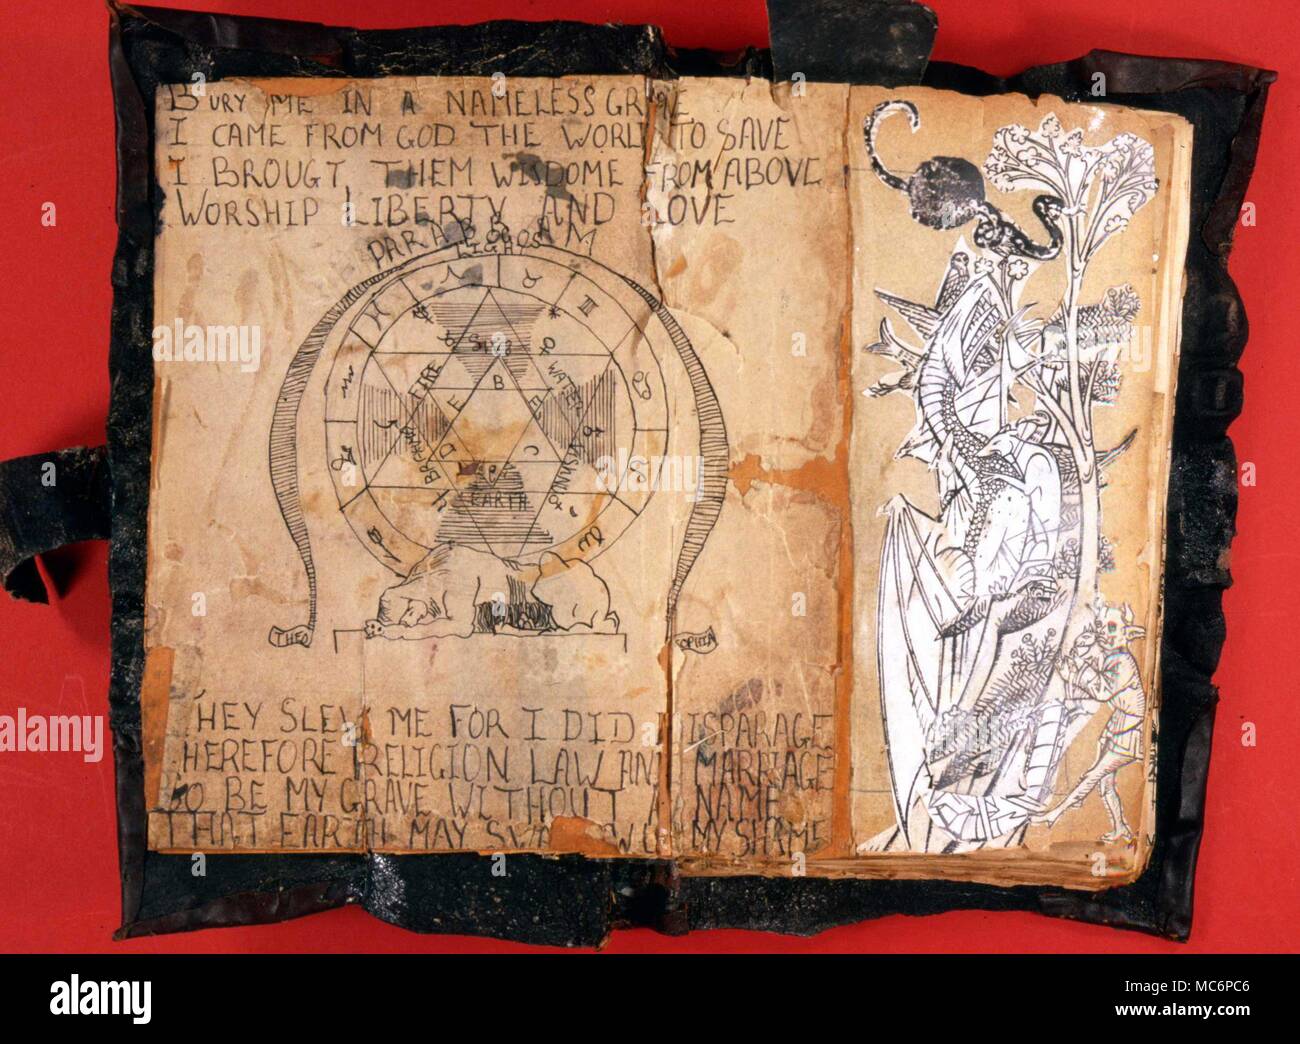 Wiccan grimoire - early twentieth century. Frontispiece to a wiccan grimoire of the Aradia type, bound in black leather. The book contains a record of spells and conjurations. Stock Photo